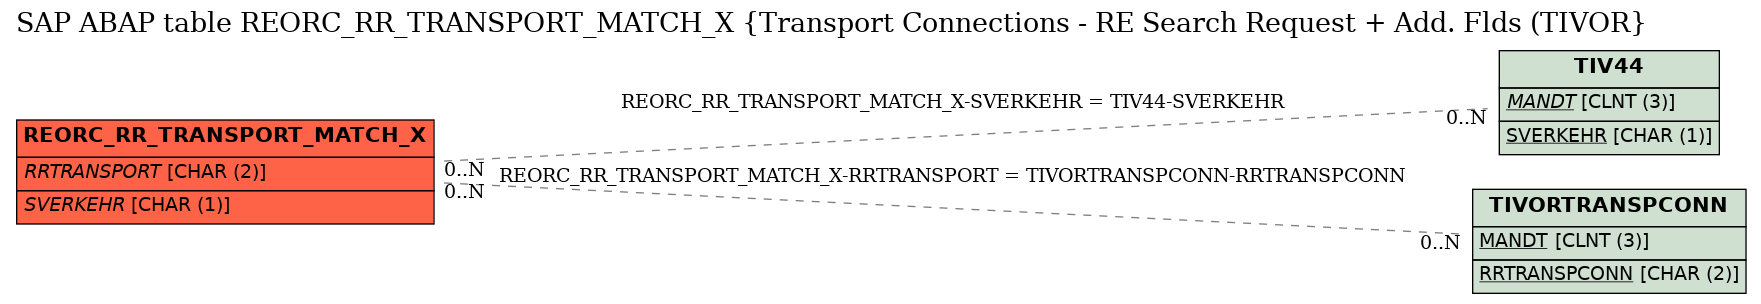 E-R Diagram for table REORC_RR_TRANSPORT_MATCH_X (Transport Connections - RE Search Request + Add. Flds (TIVOR)